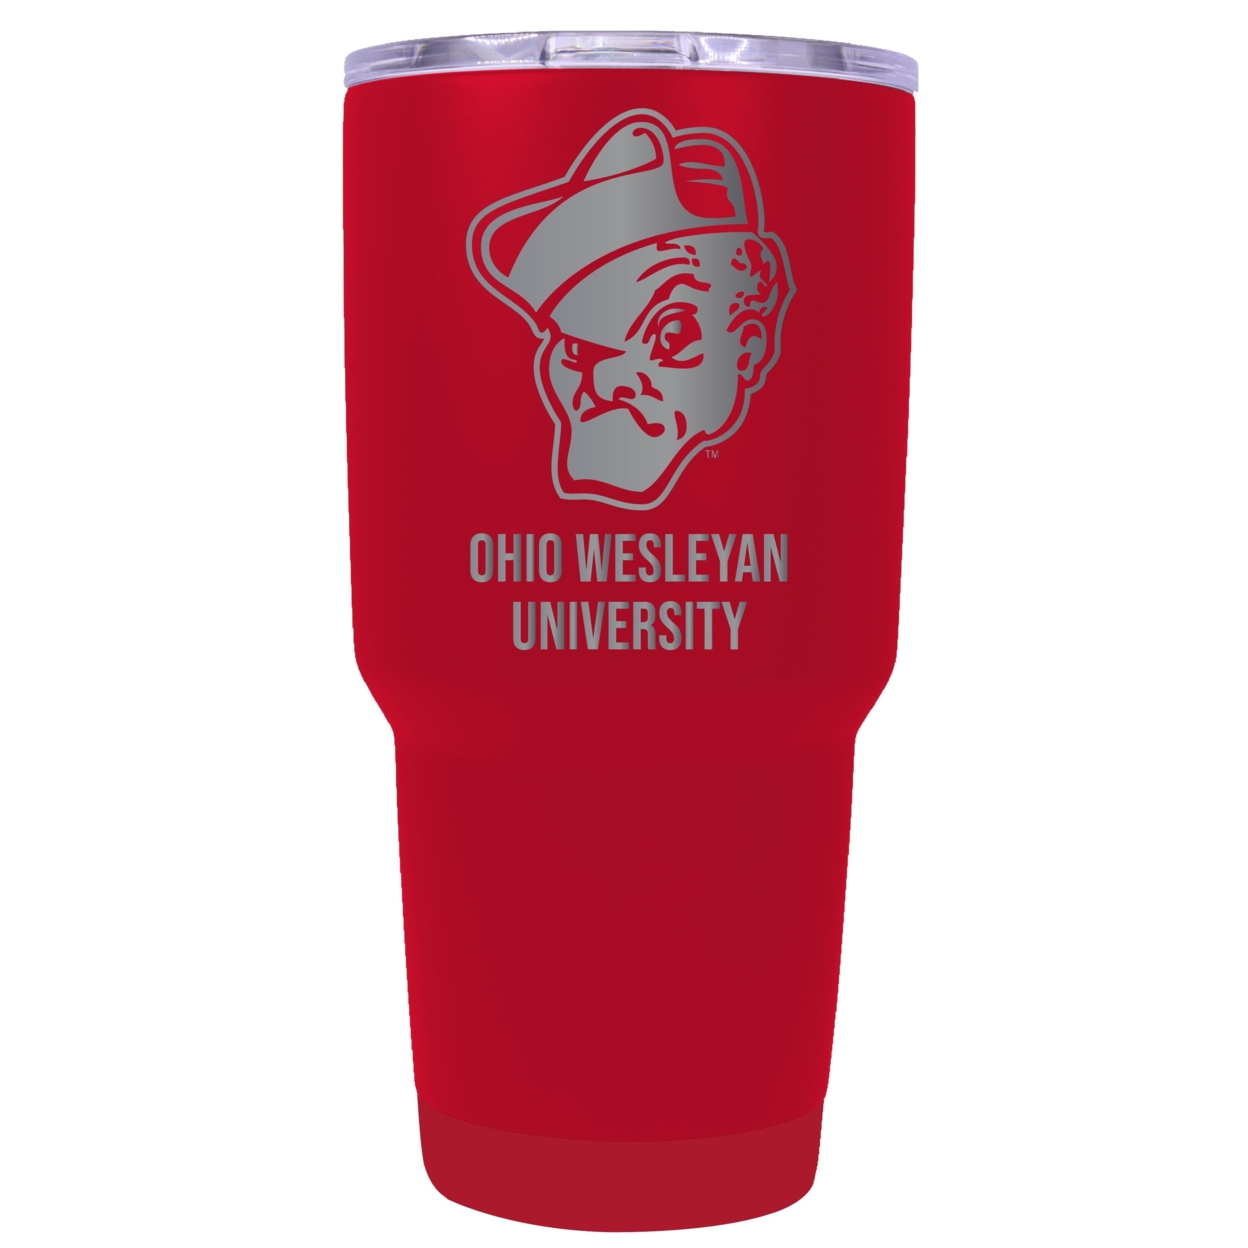 Ohio Wesleyan University 24 Oz Laser Engraved Stainless Steel Insulated Tumbler - Choose Your Color. - Red